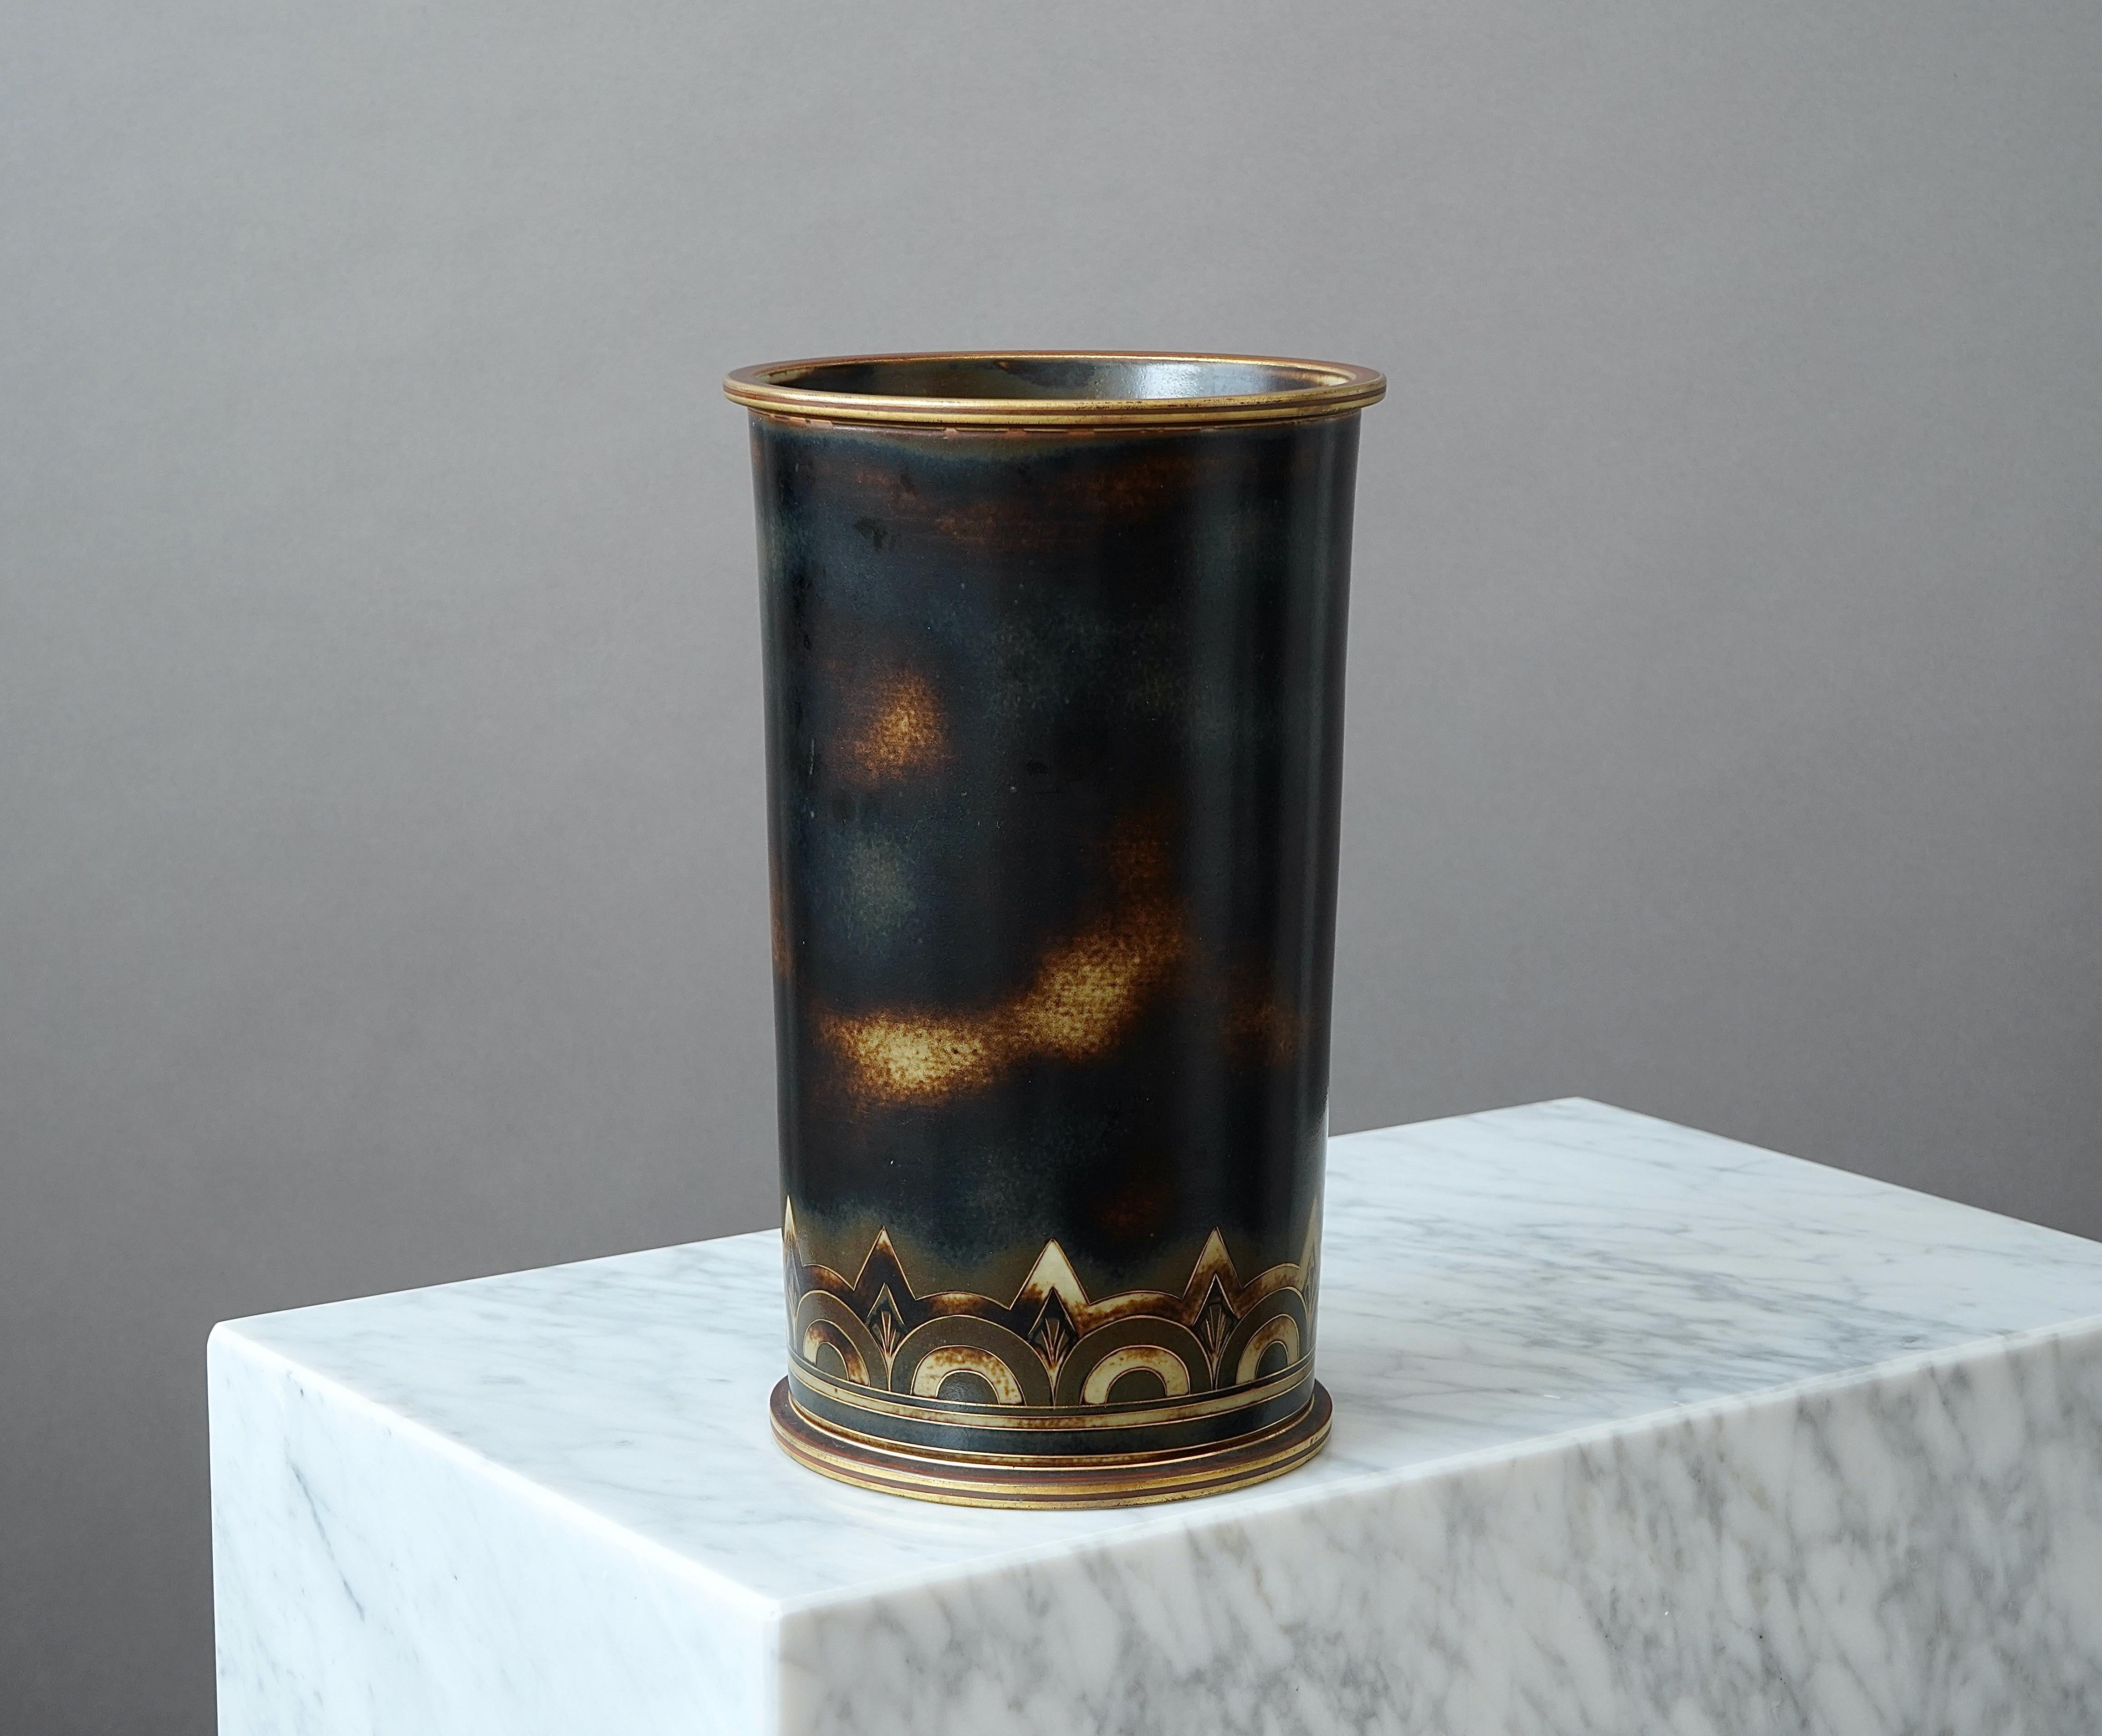 Turned Large and Unique Art Deco Vase by Gunnar Nylund for ALP, Sweden, 1930s For Sale